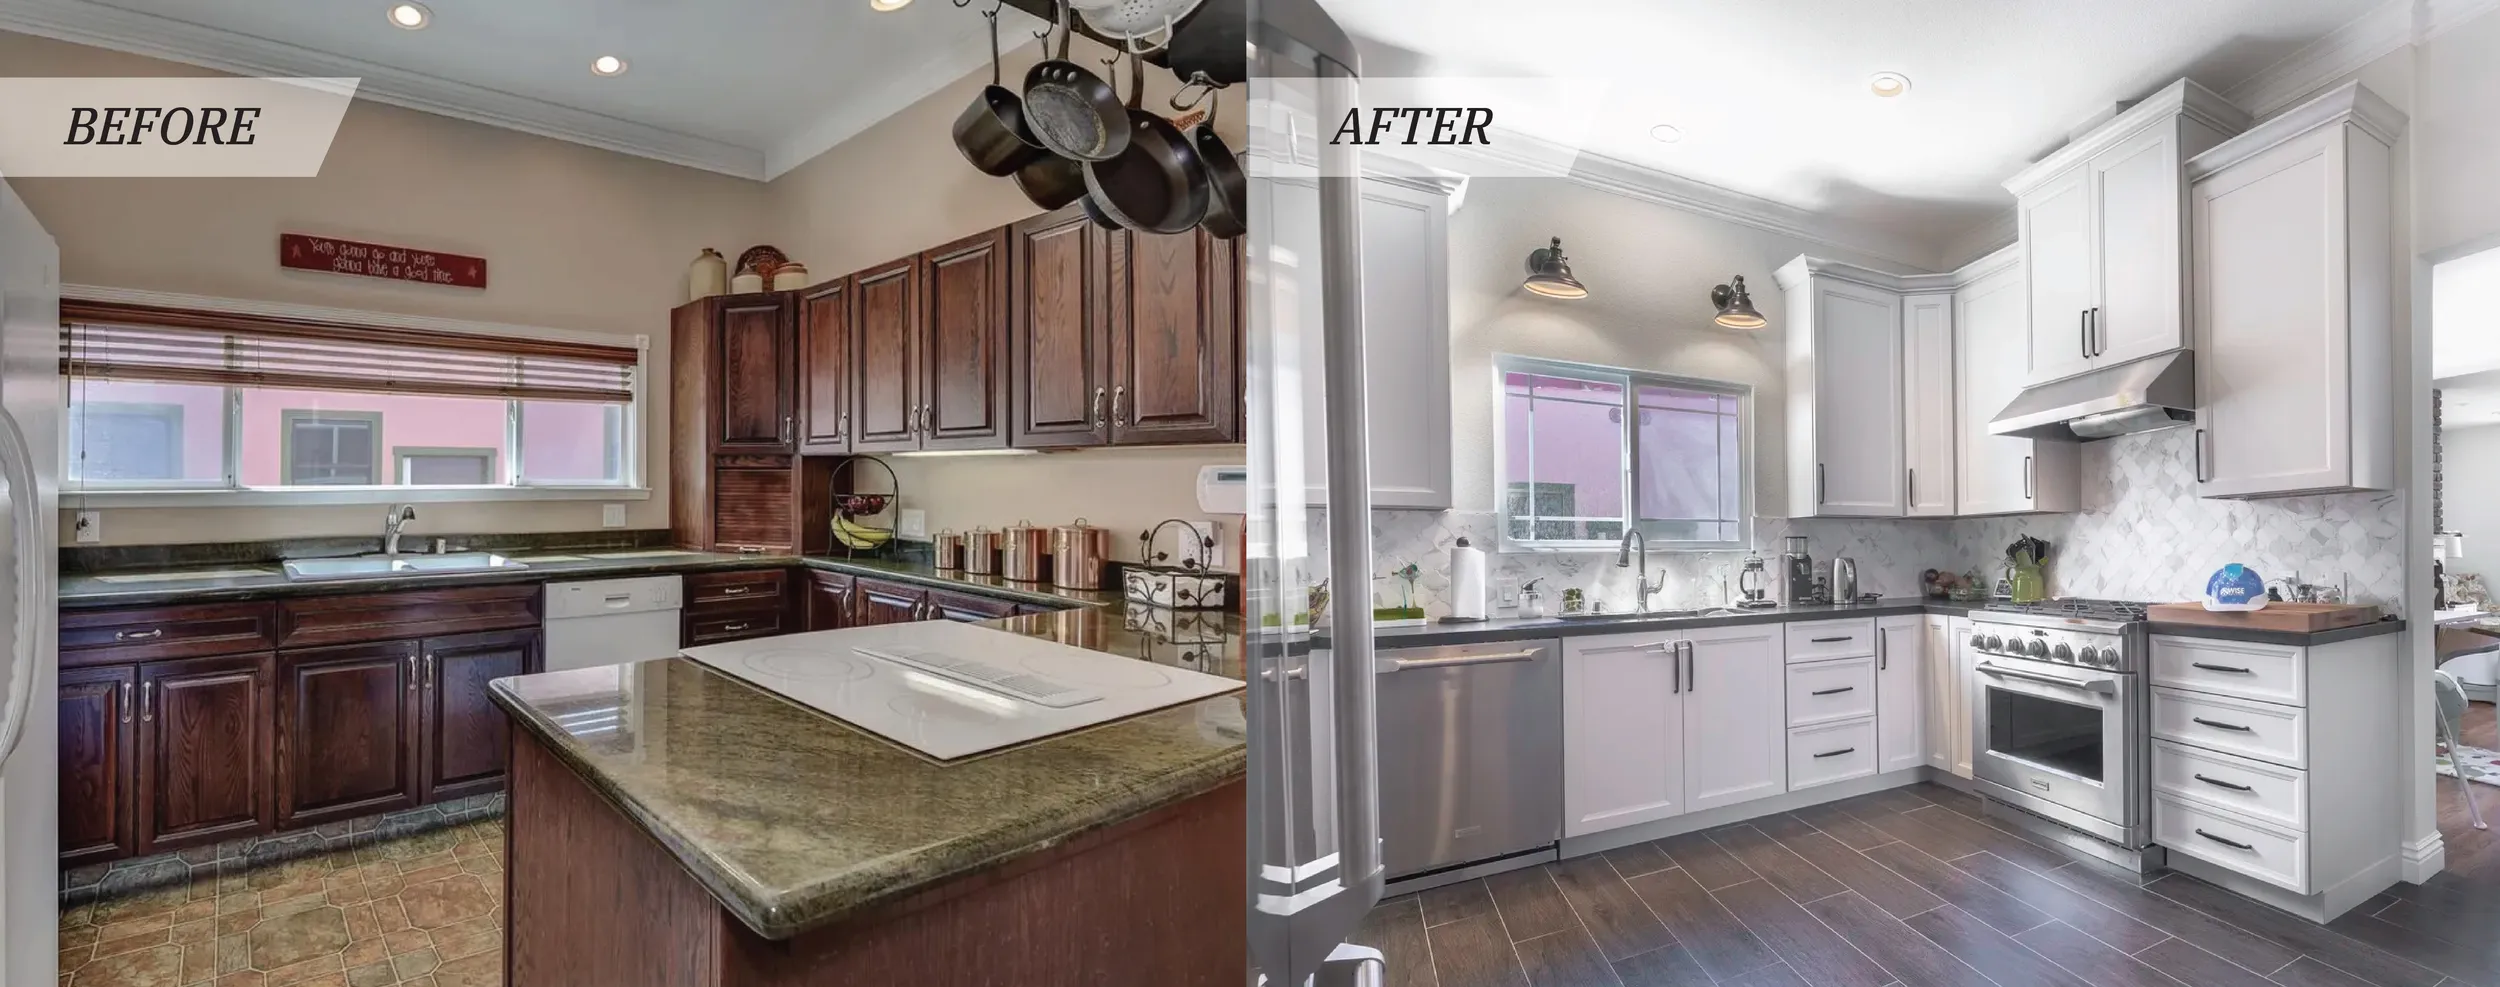 Before and after kitchen remodel transformation on Magnolia Avenue in San Jose